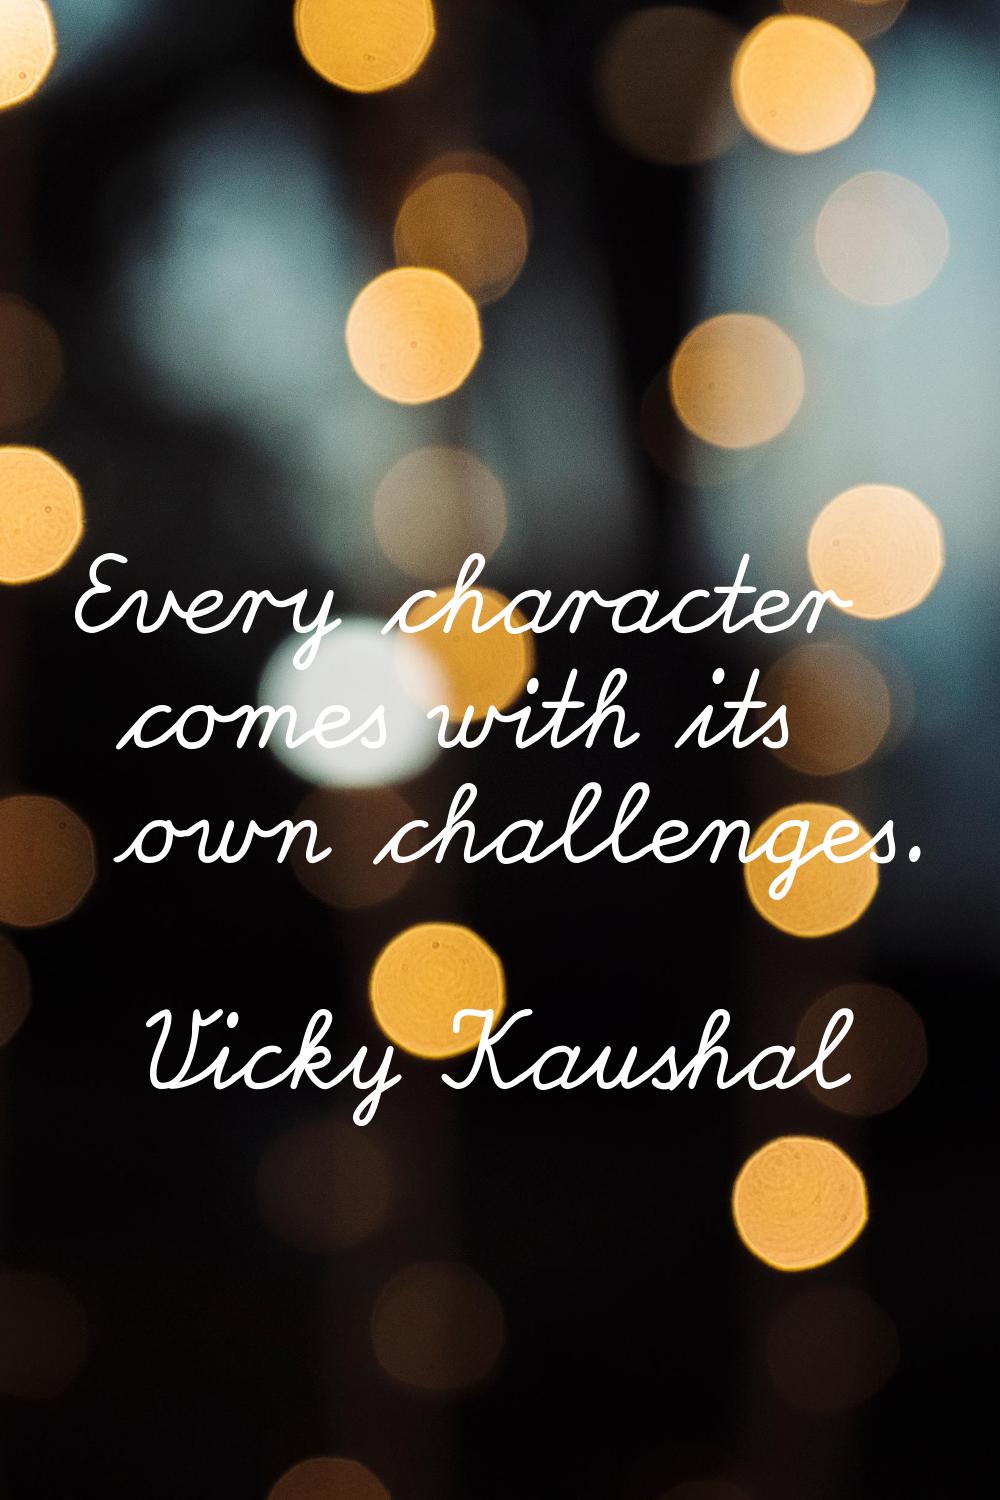 Every character comes with its own challenges.